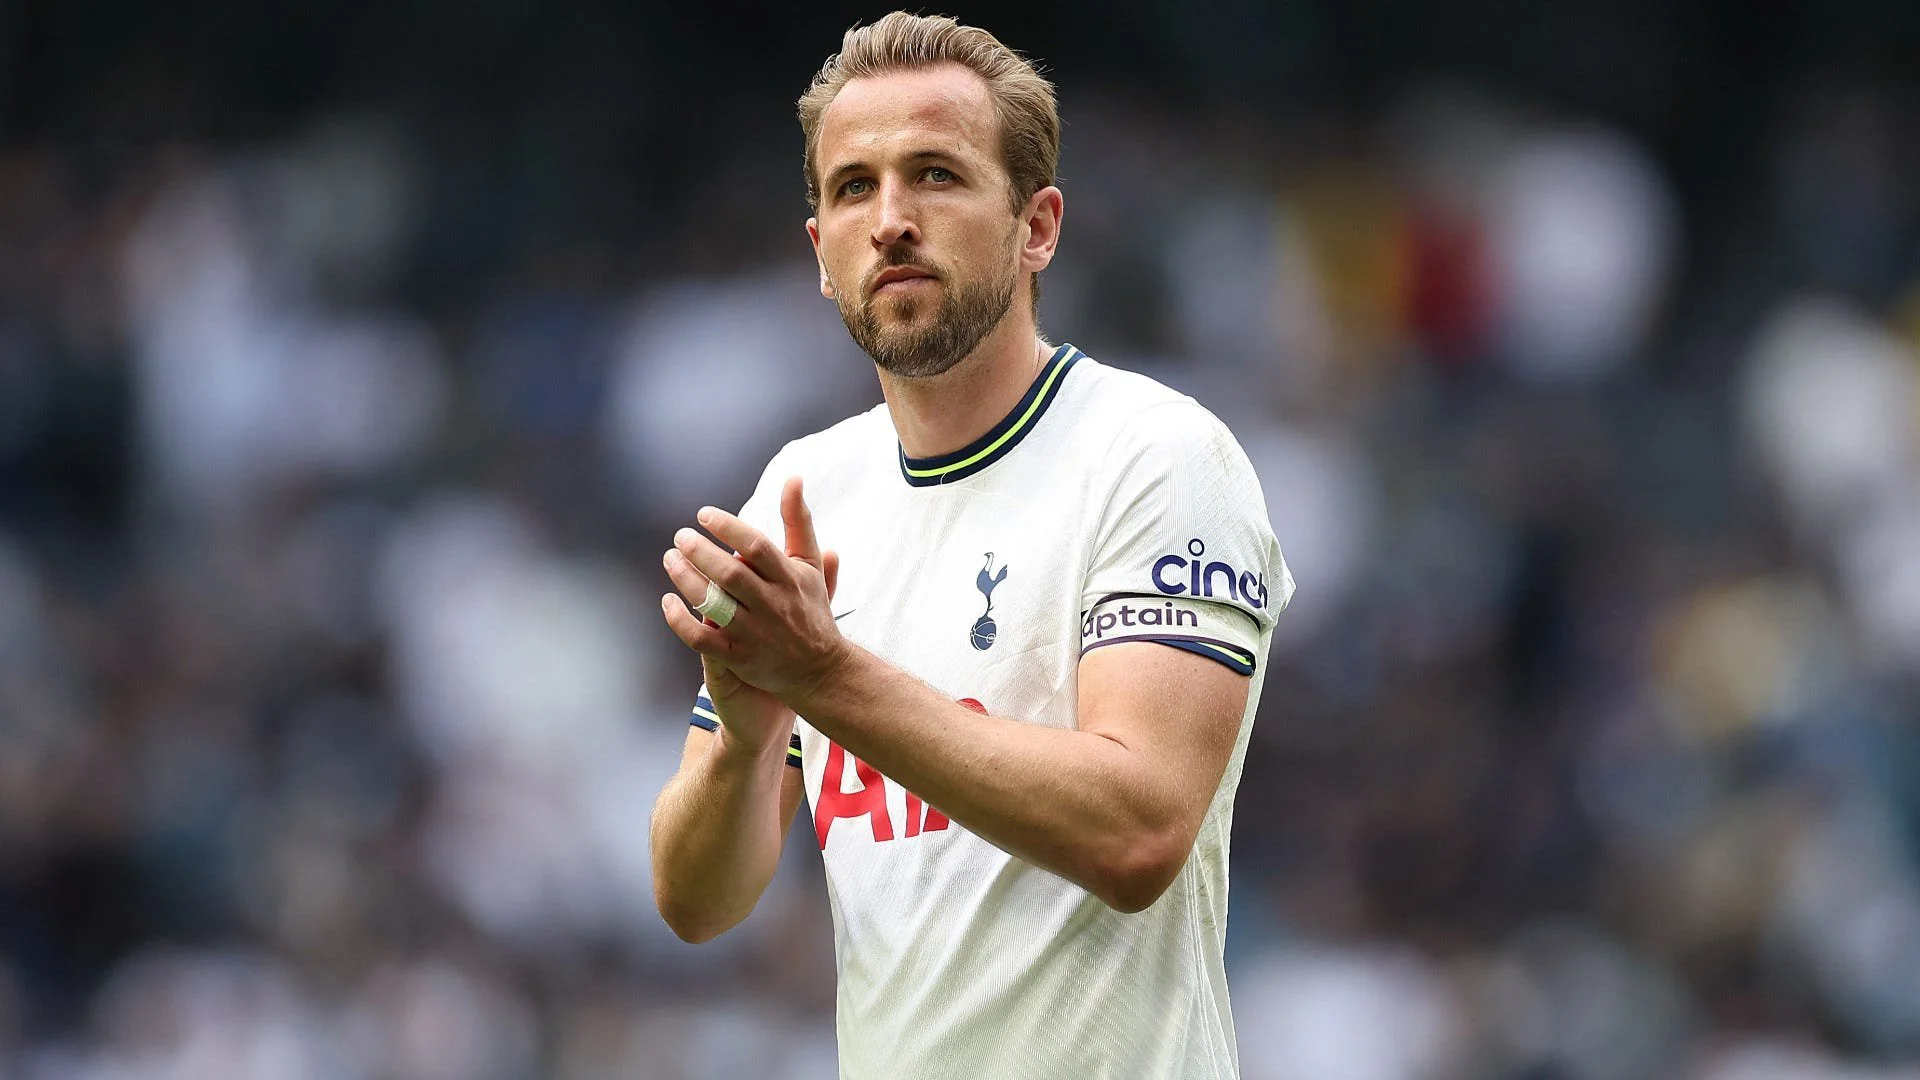 Chelsea's Strategic Moves: Pursuing Harry Kane and Aaron Ramsdale Amidst FA Cup Challenges